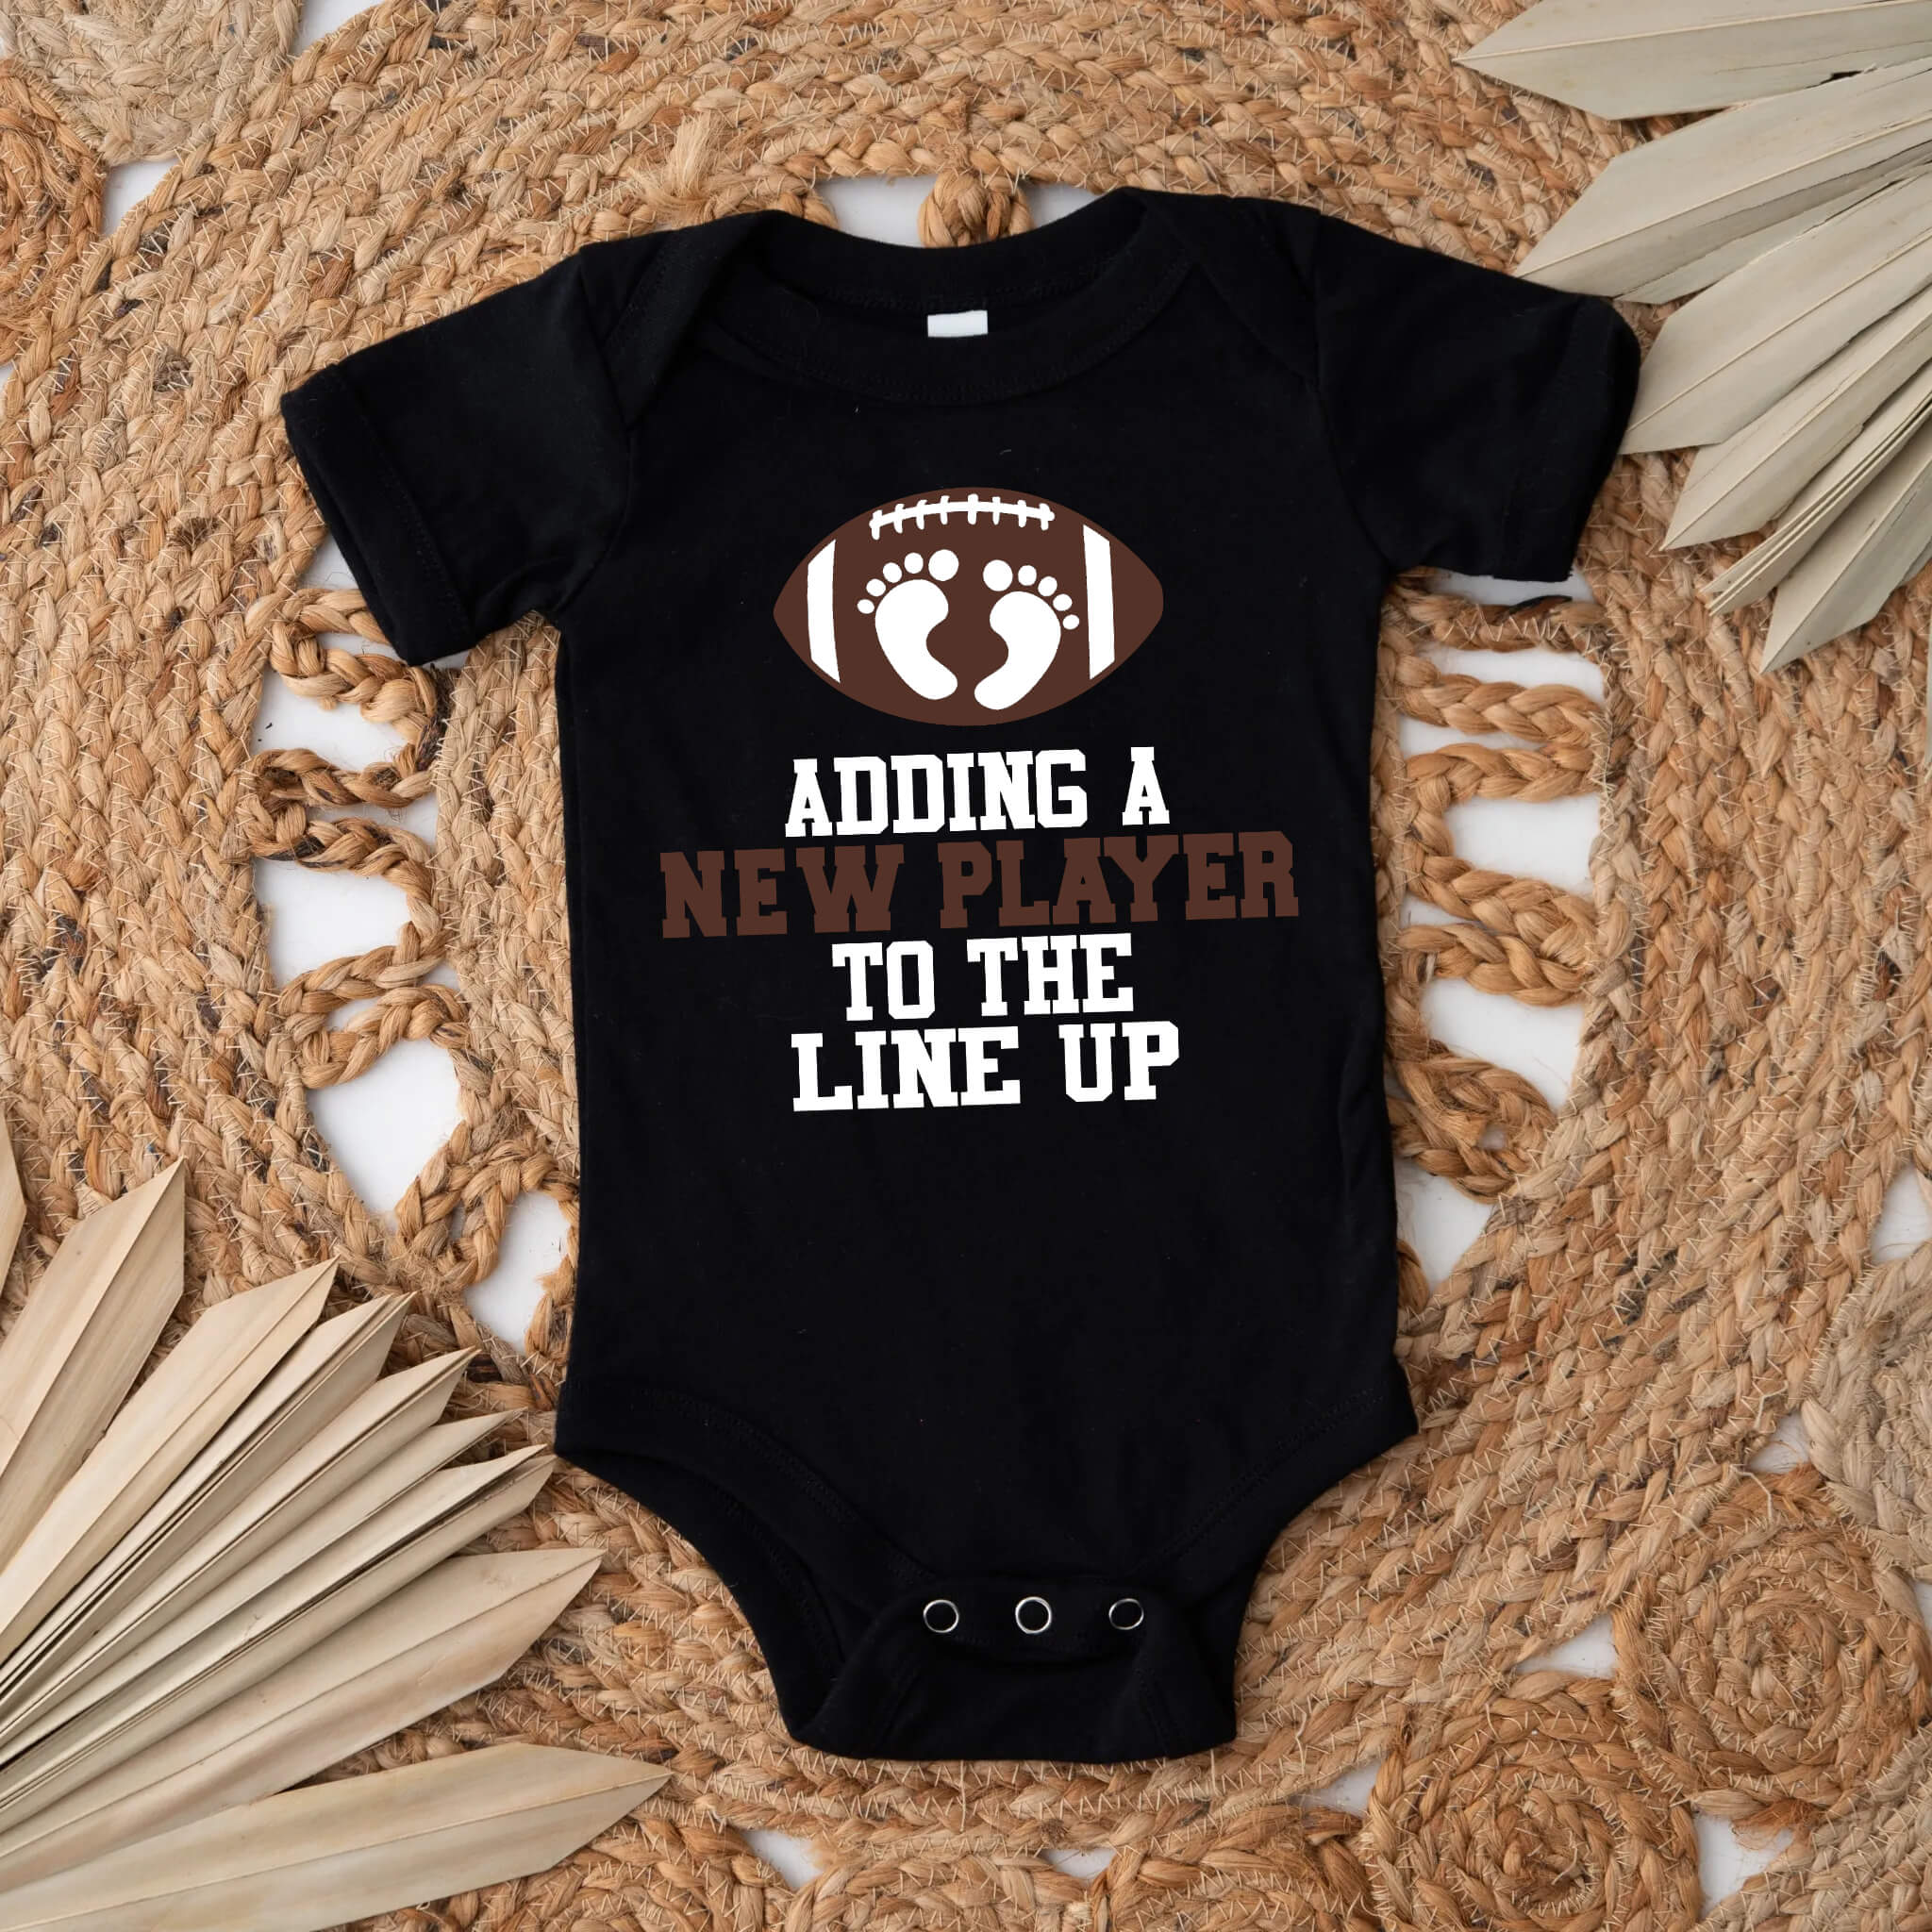 Personalized Pregnancy Announcement Adding A New Player To The Line Up Football Inspired Customizable Onesie